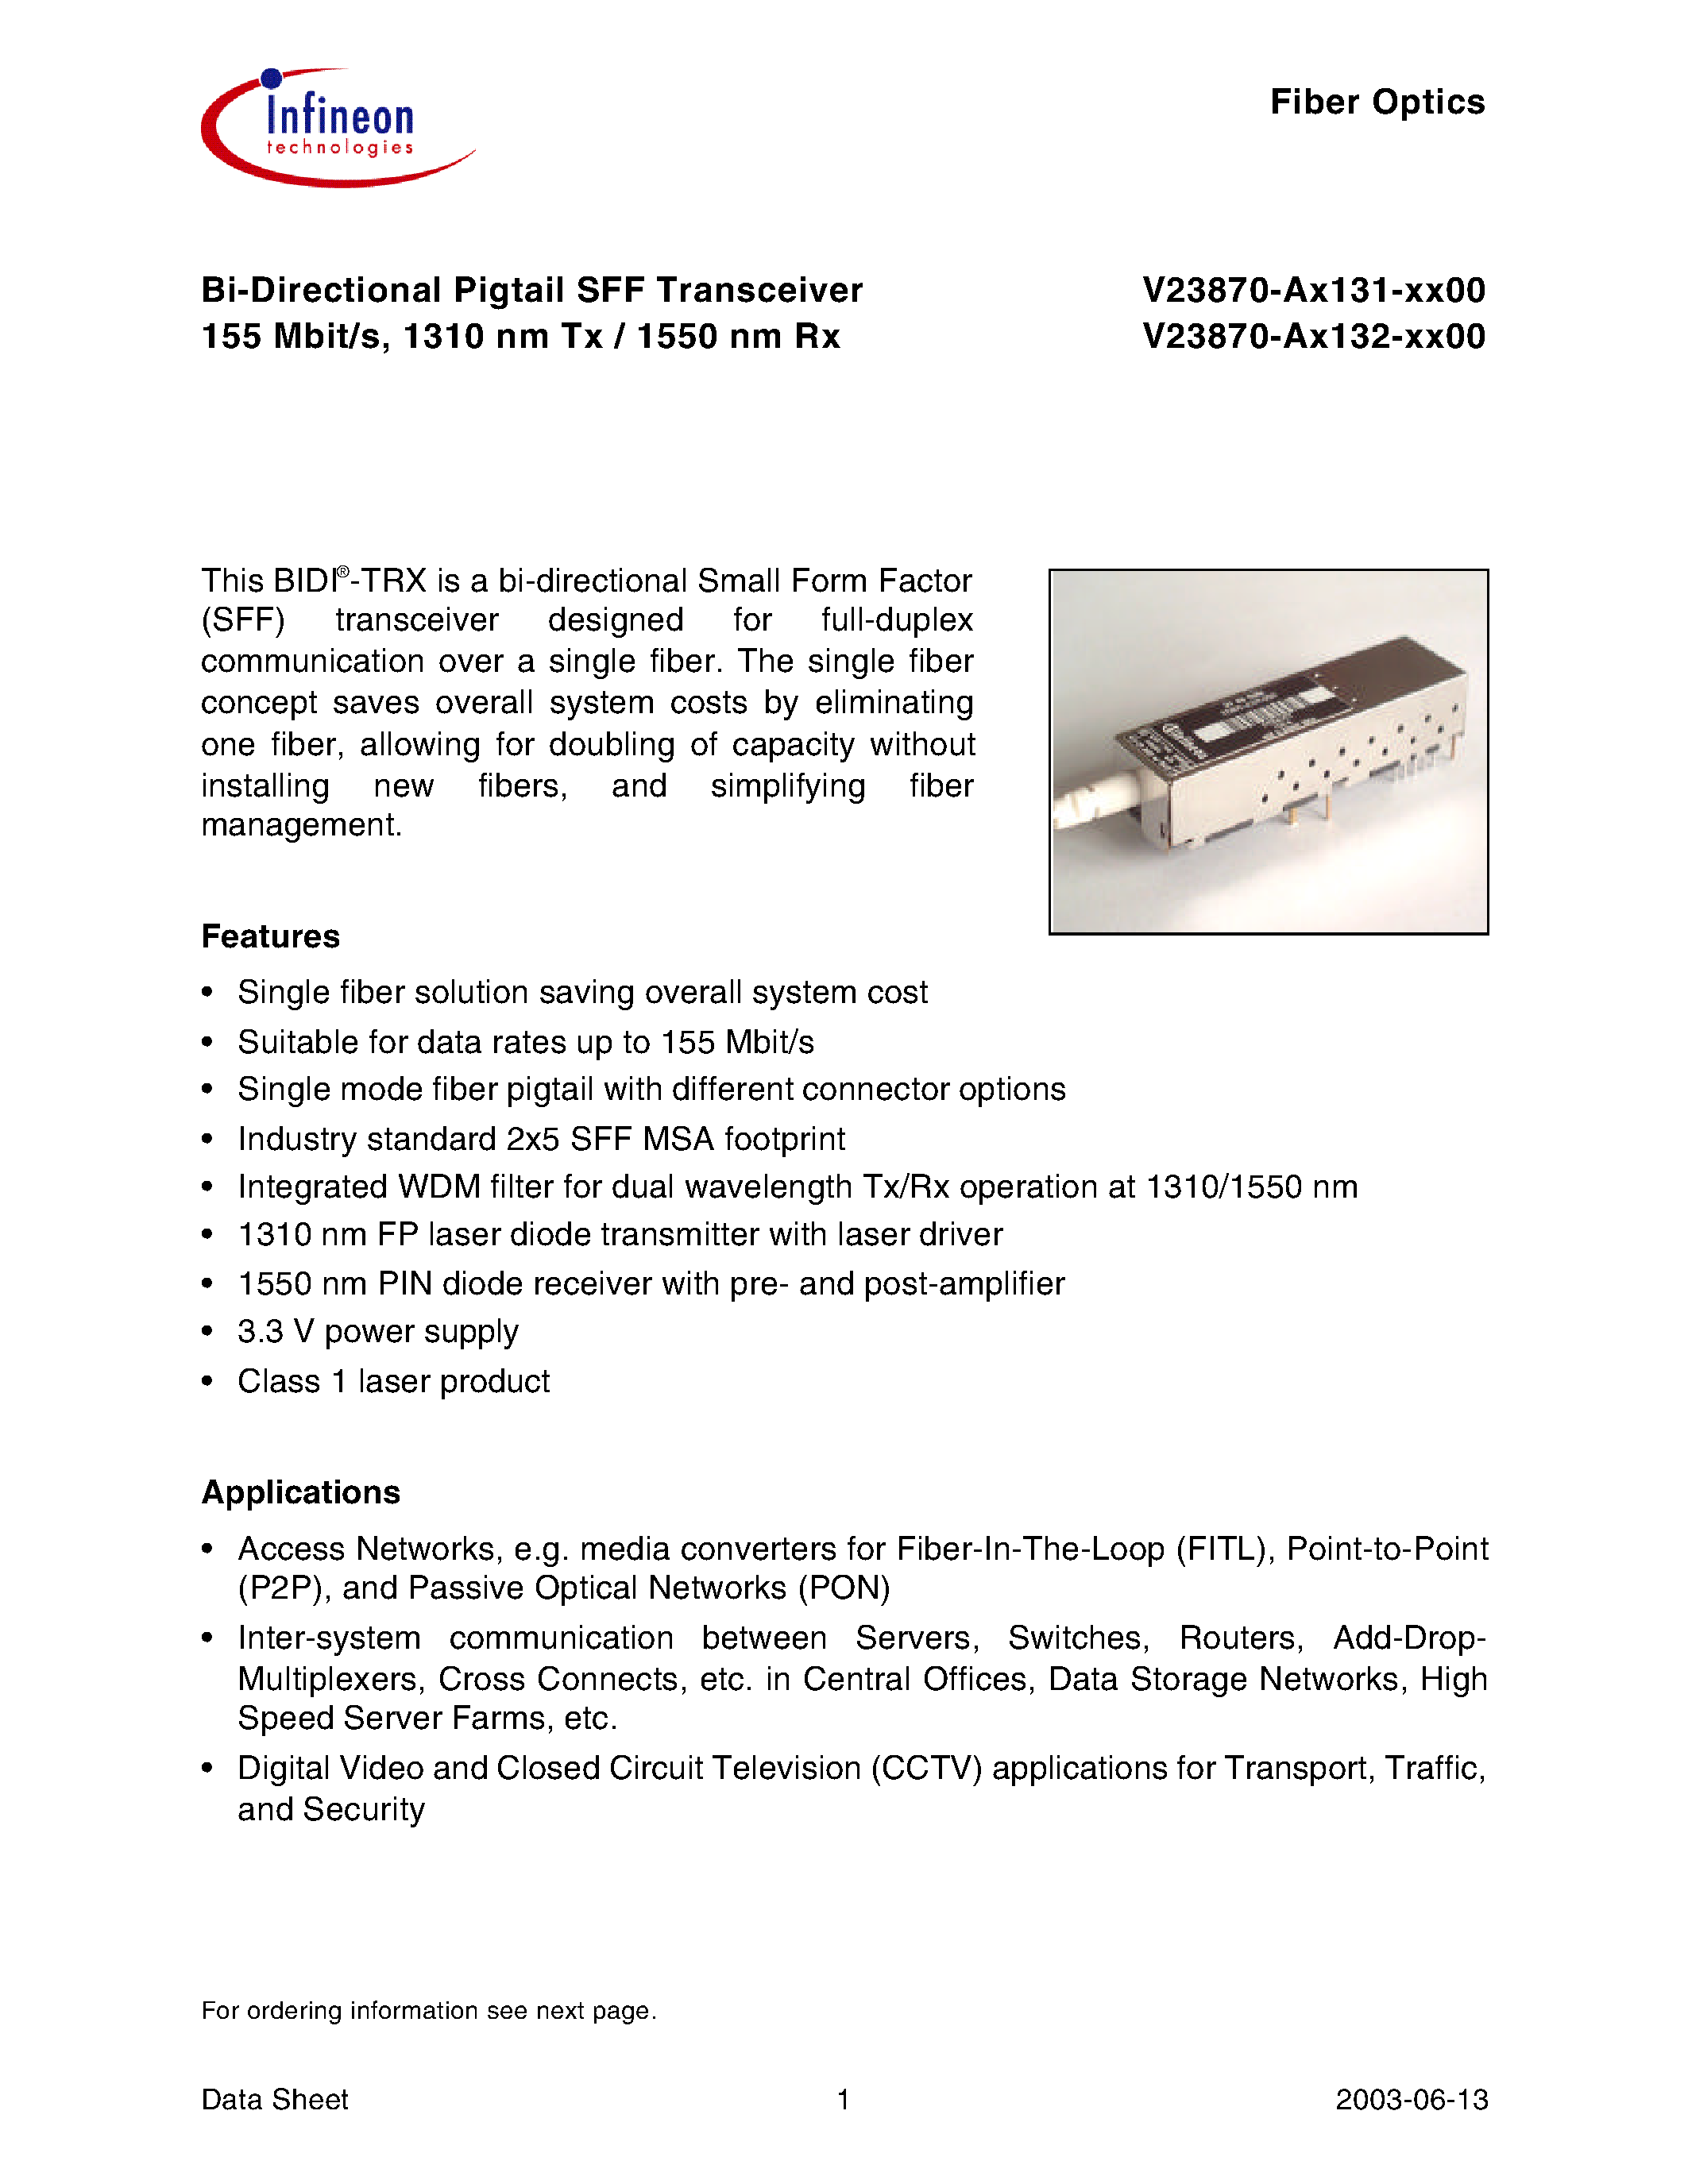 Datasheet V23870-A1131-C200 - Bi-Directional Pigtail SFF Transceiver 155 Mbit/s/ 1310 nm Tx / 1550 nm Rx page 1